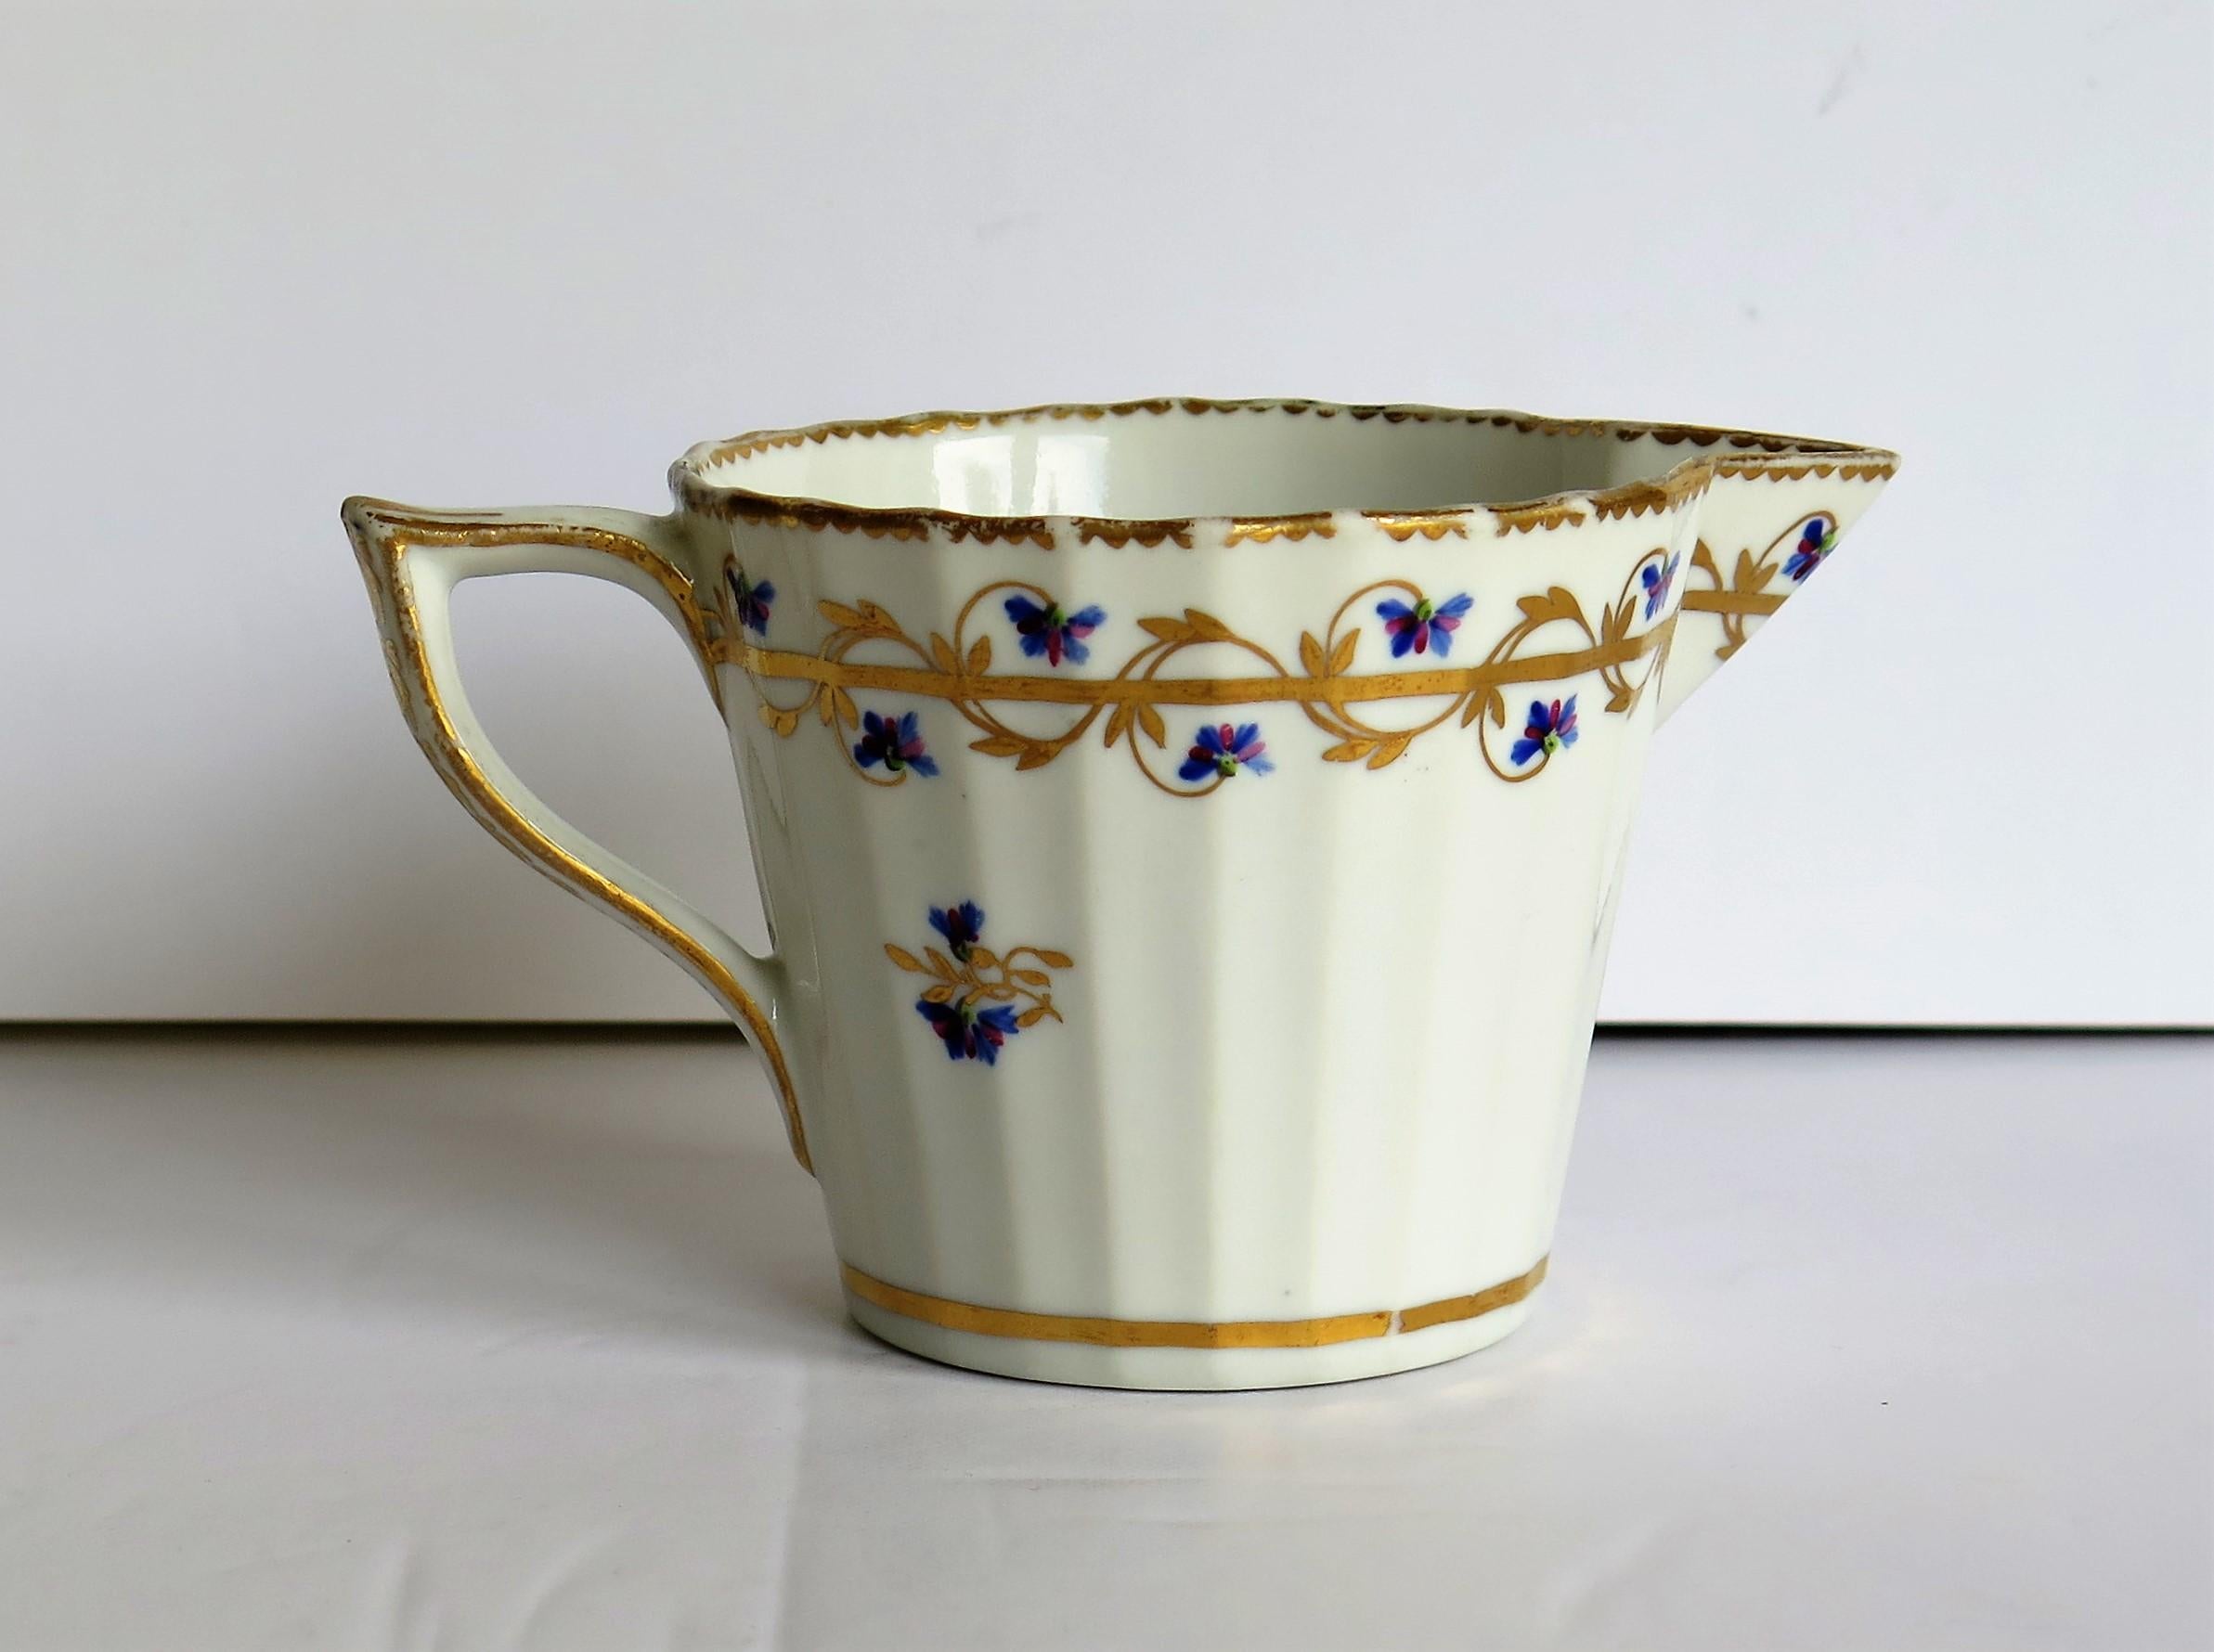 This is an exquisite, porcelain cream jug or creamer, hand painted with an early pattern number 111 and made by the Derby factory, in the reign of George 111 in the late 18th century, circa 1785-1790.
 
Early 18th century creamers by Derby are